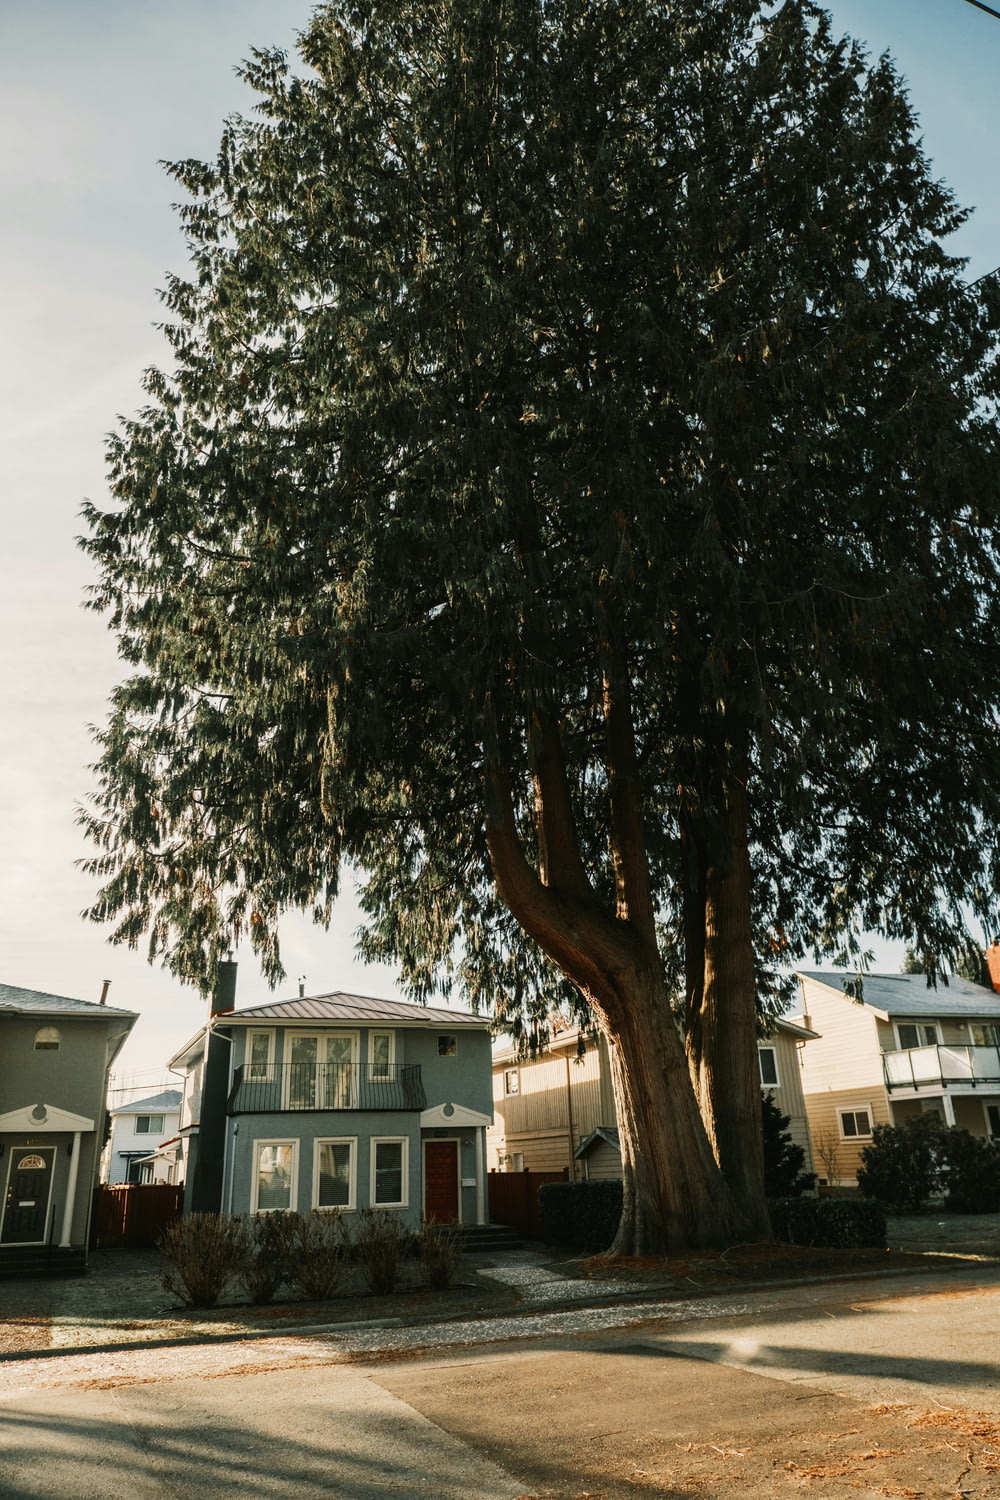 a large tree in front of some houses